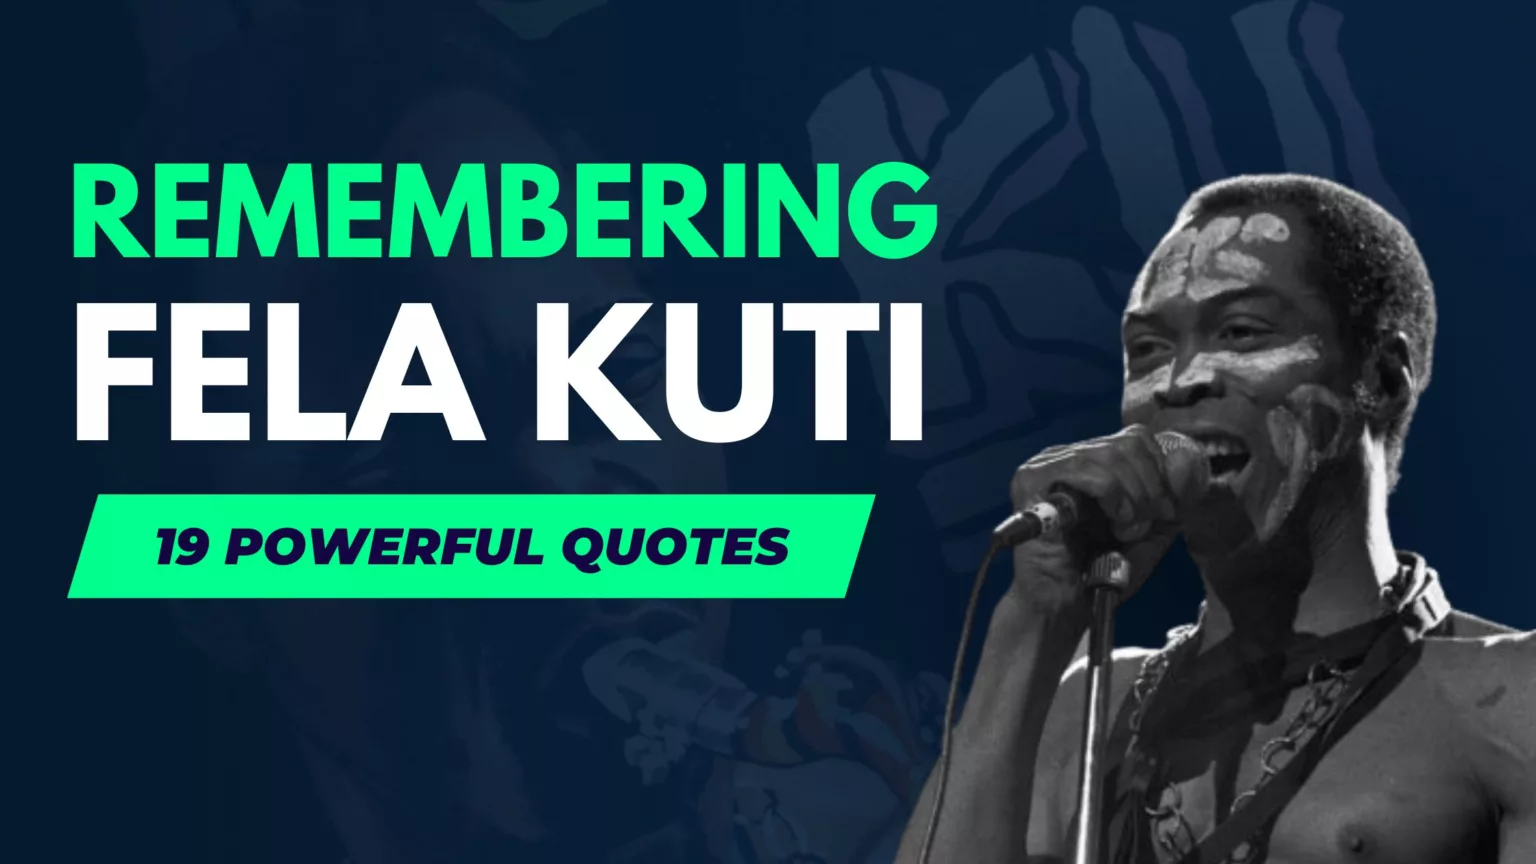 Remembering Remembering Fela Kuti: 19 Powerful Quotes to Inspire You